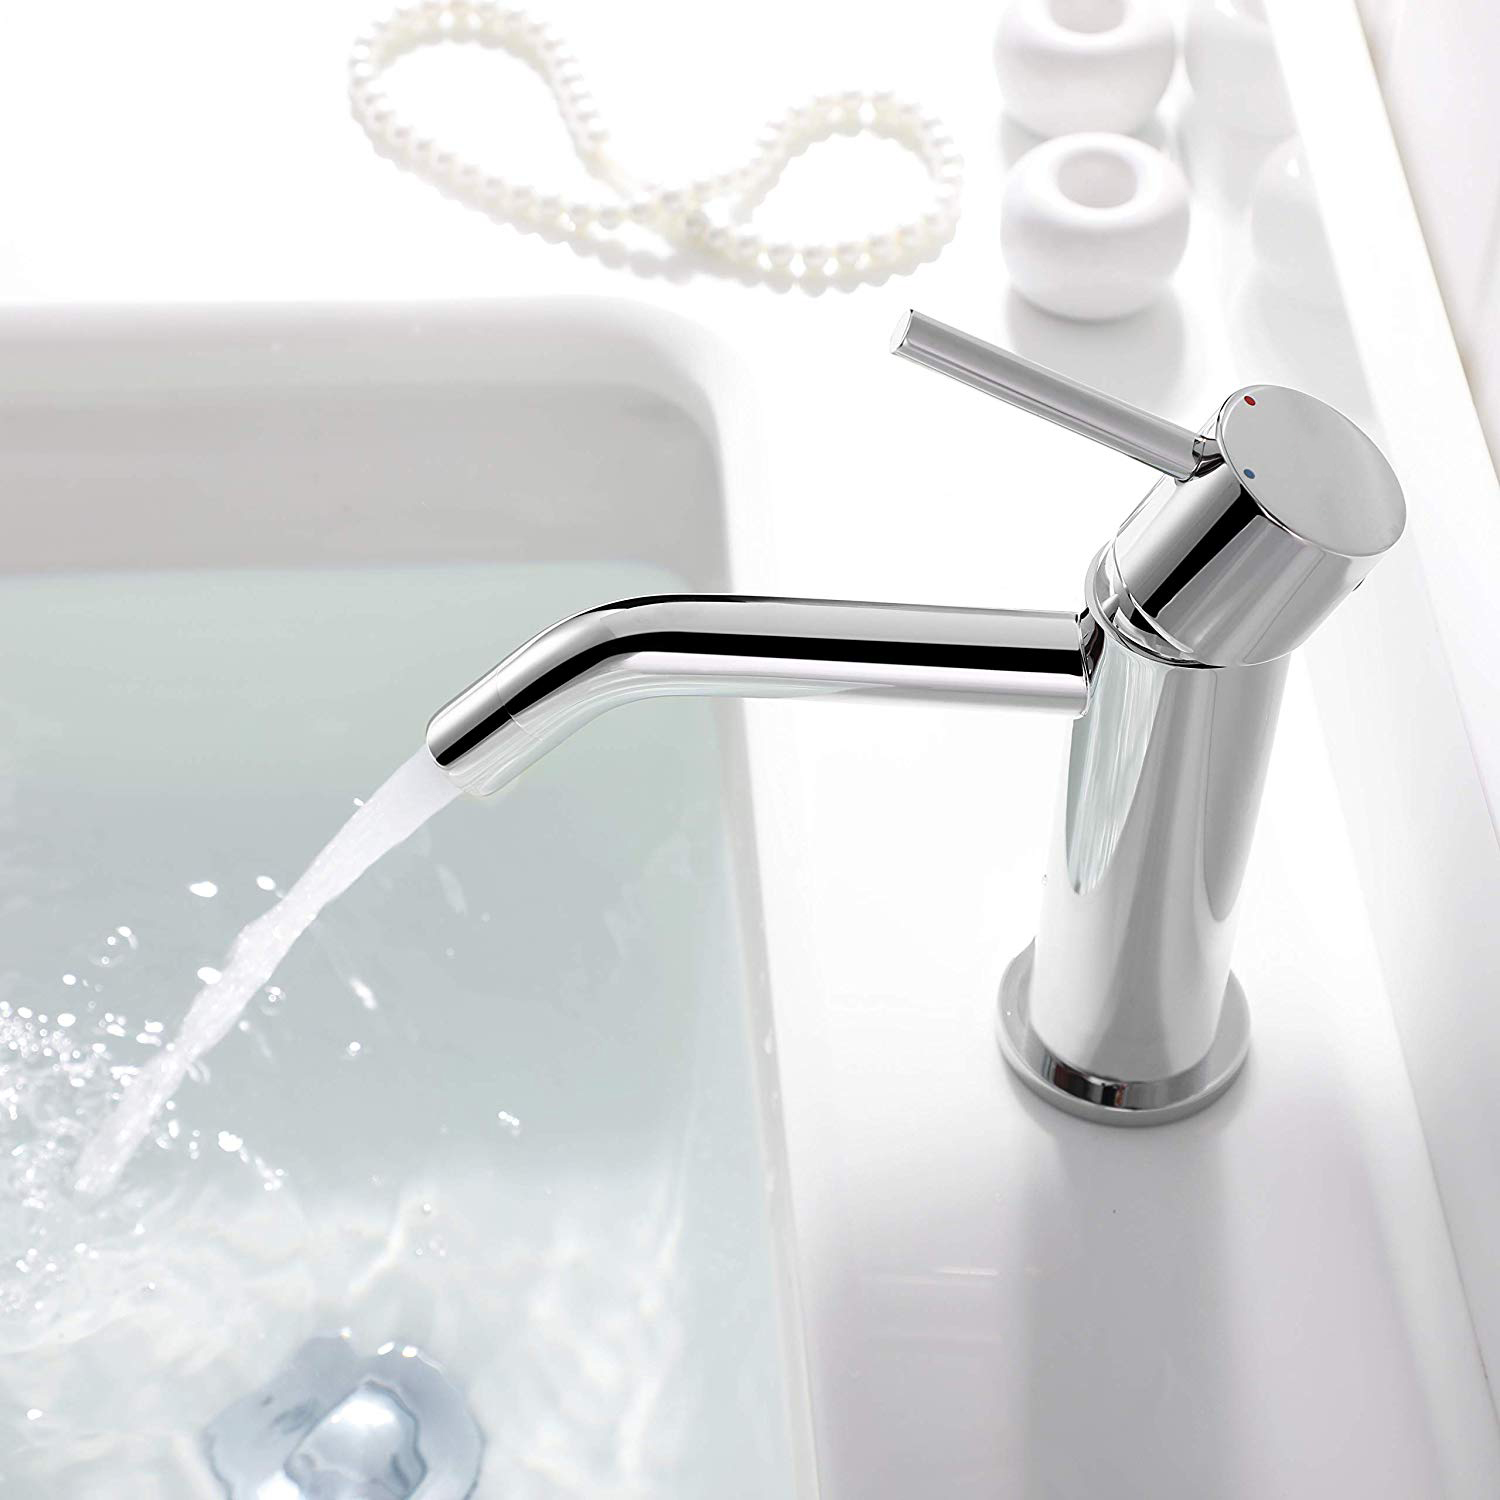 Aquacubic Single handle taps one hole mixer stainless steel sink tap bathroom face wash Toilet Bathroom Basin Sink Faucet